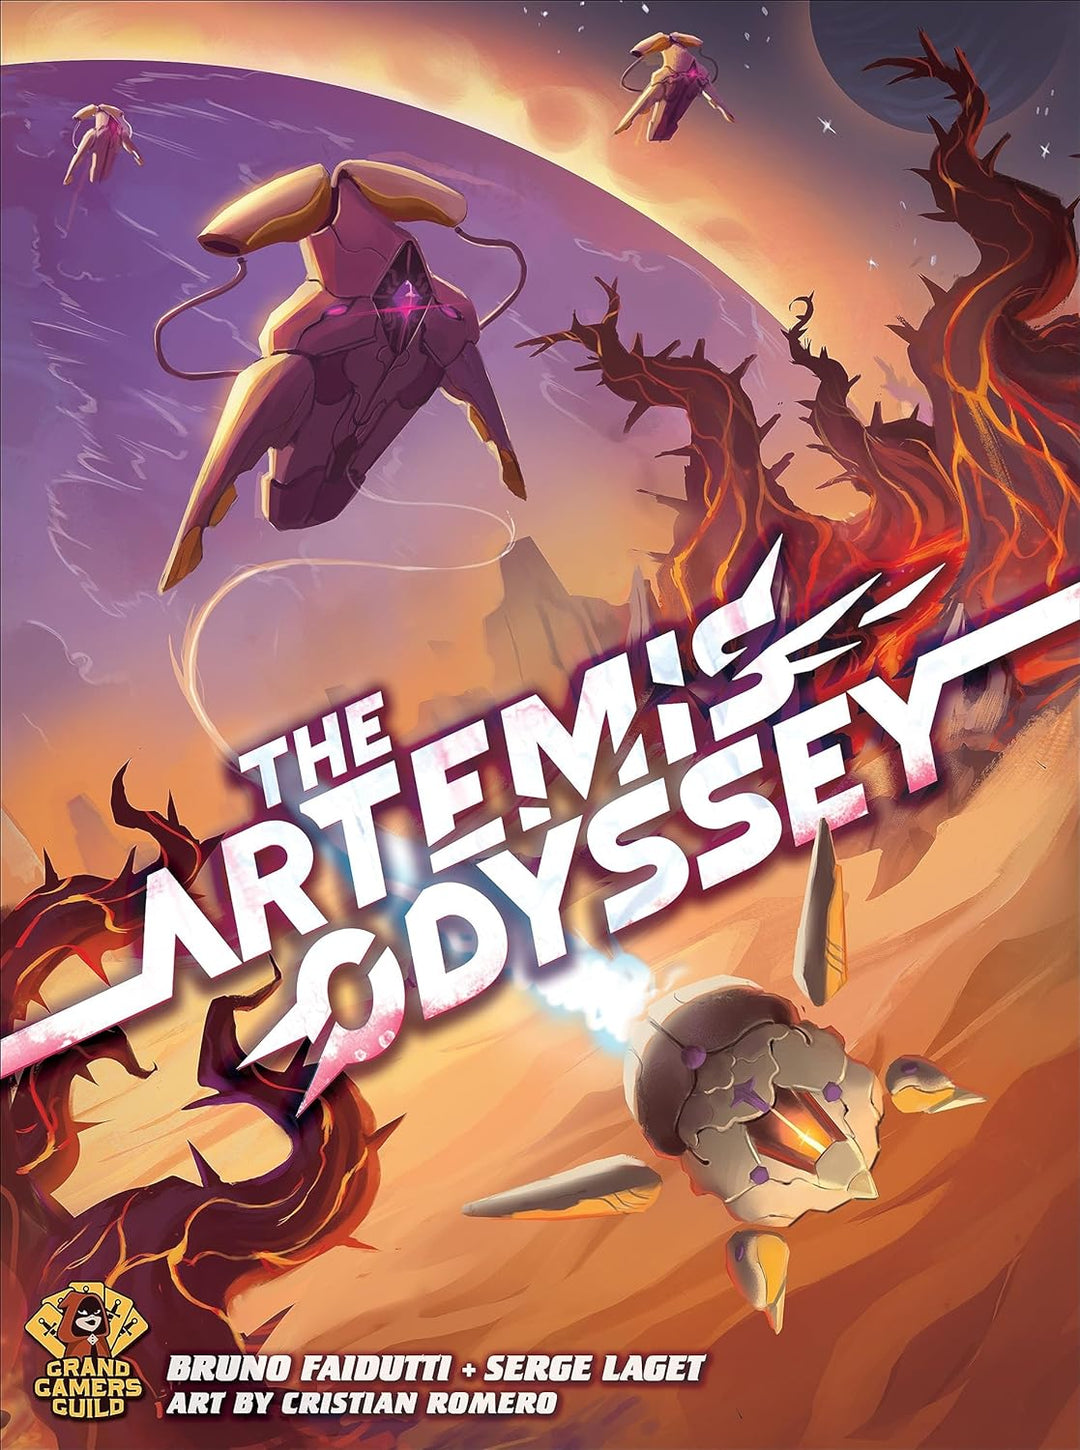 The Artemis Odyssey by Grand Gamers Guild, Strategy Board Game